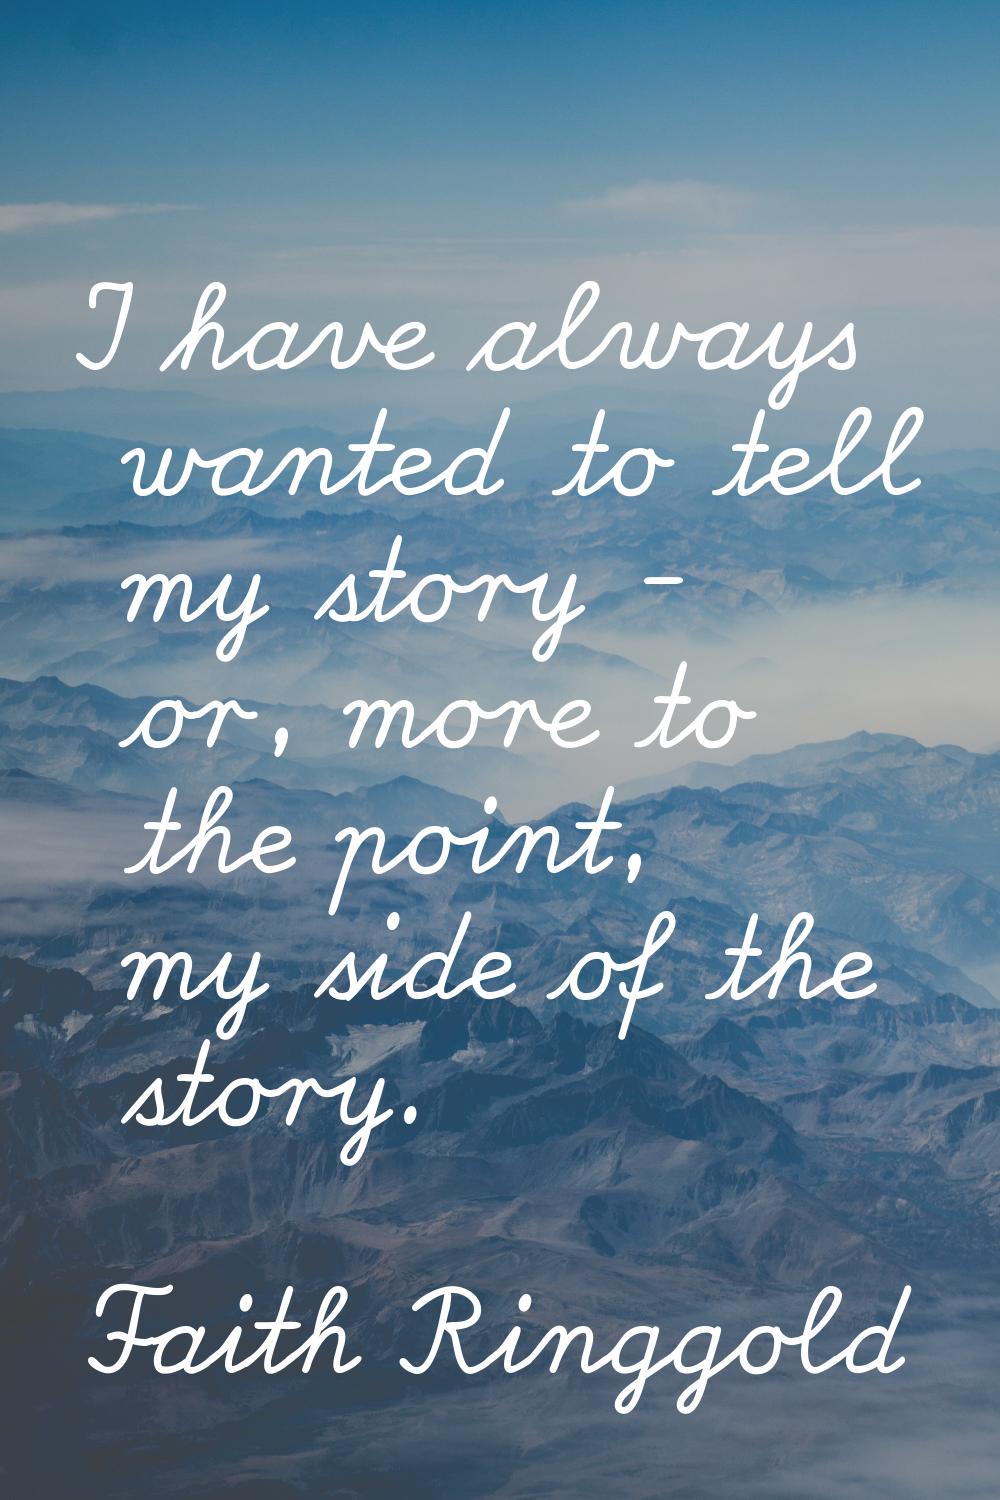 I have always wanted to tell my story - or, more to the point, my side of the story.